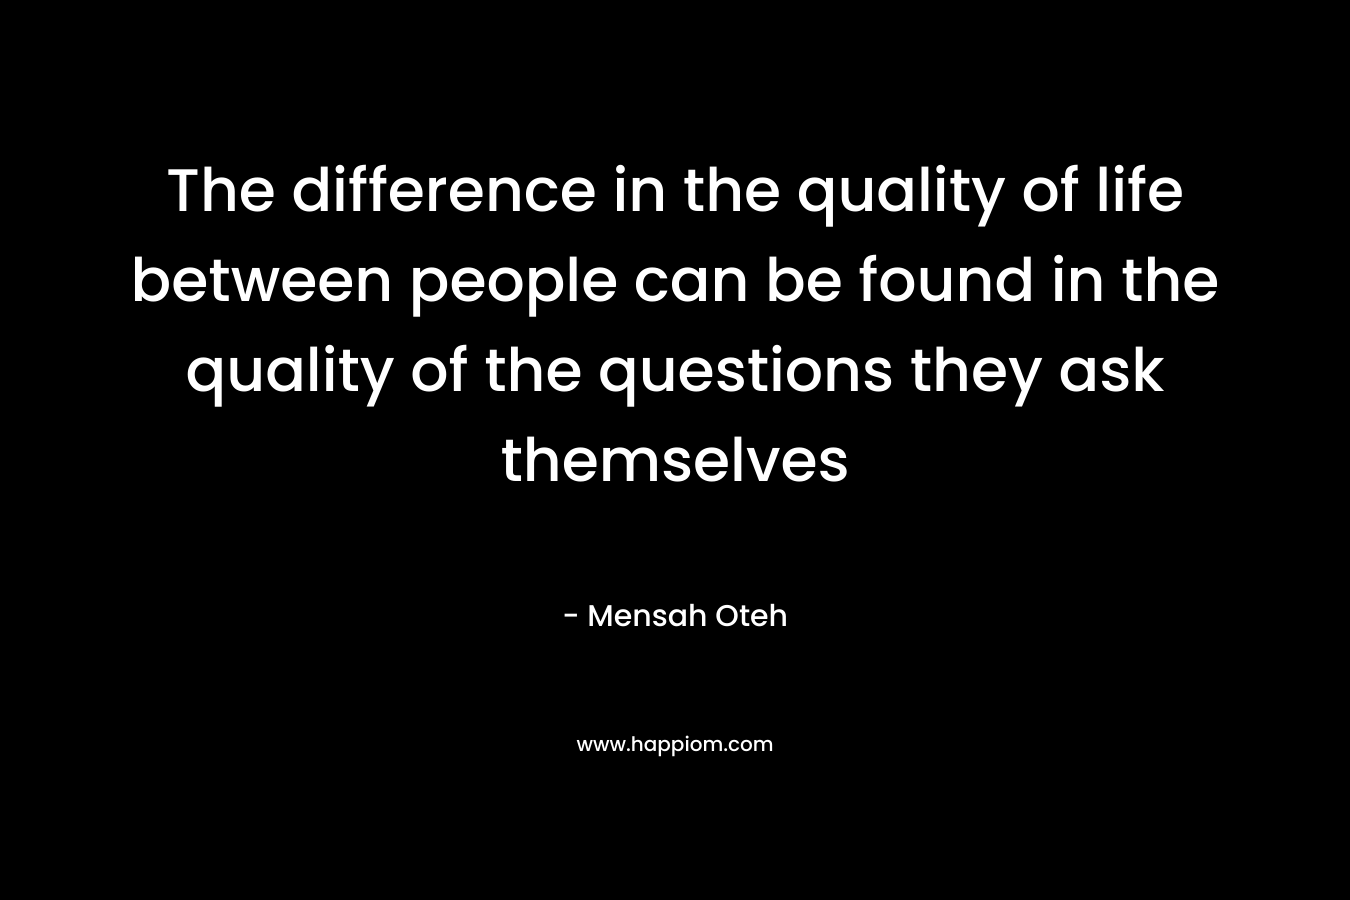 The difference in the quality of life between people can be found in the quality of the questions they ask themselves